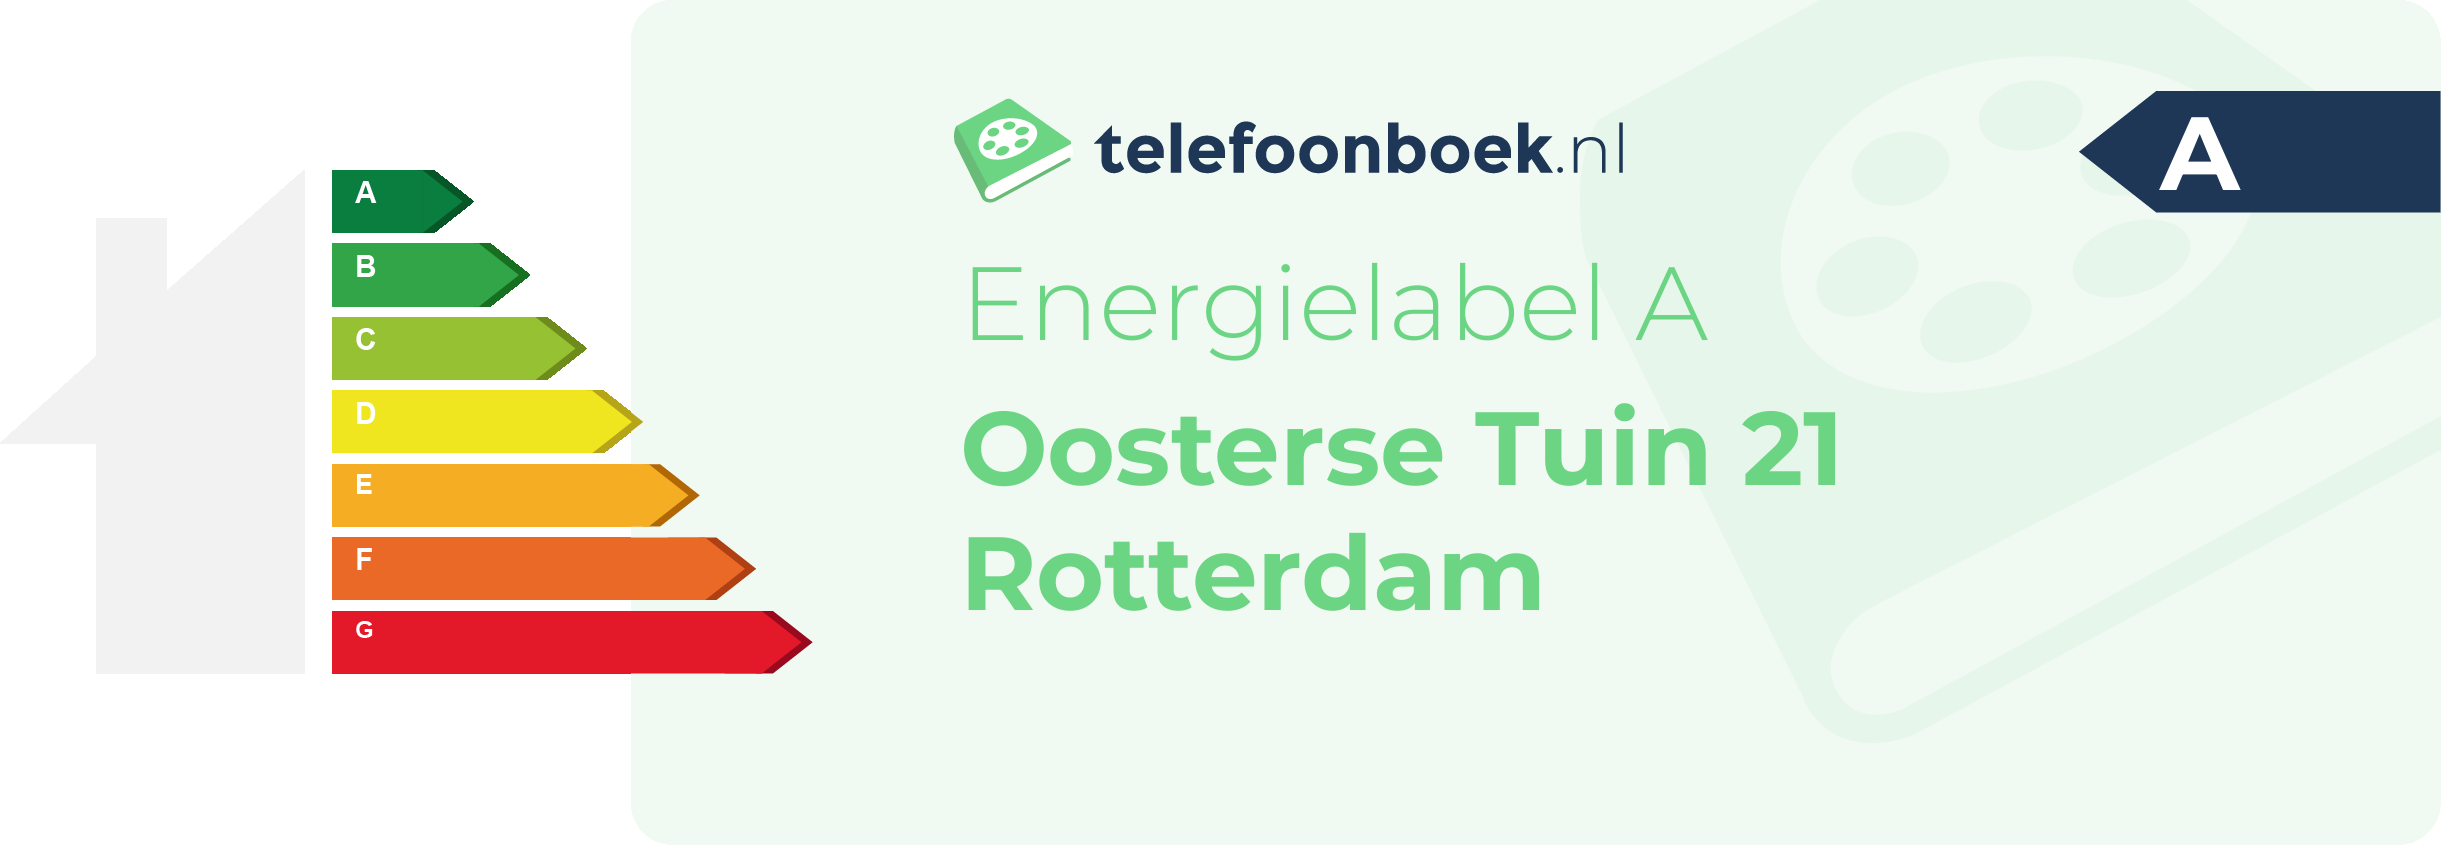 Energielabel Oosterse Tuin 21 Rotterdam